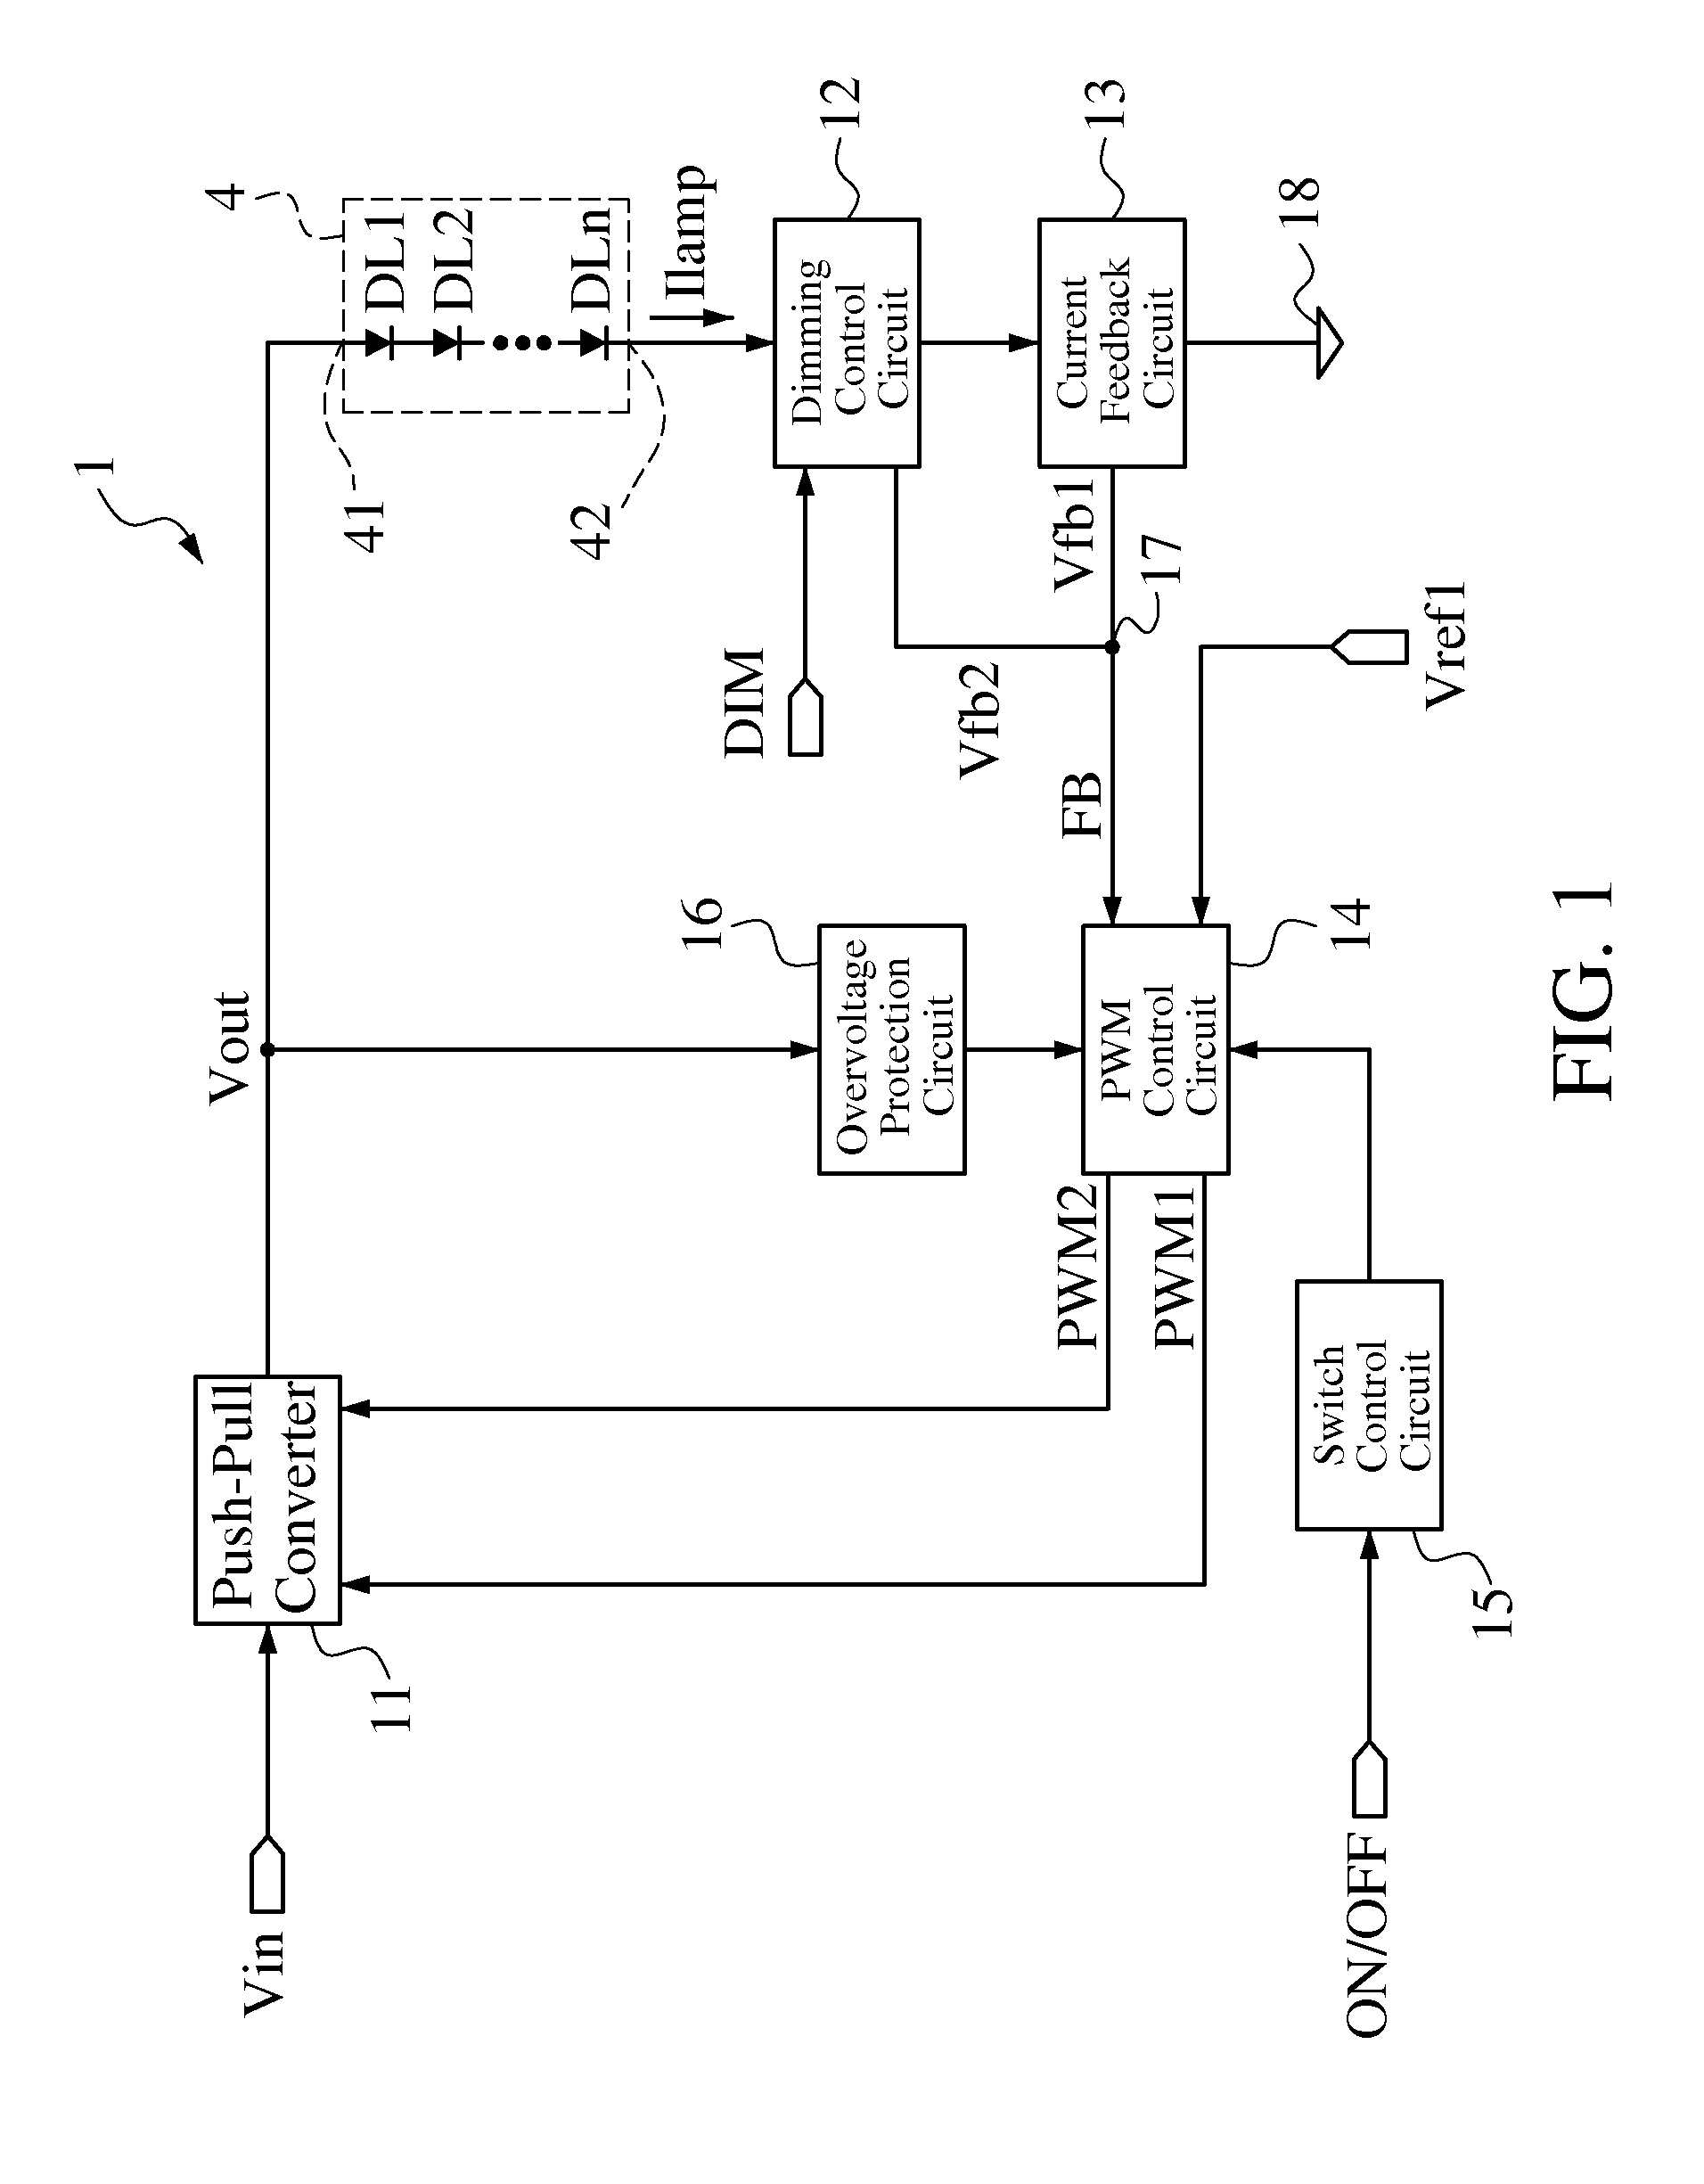 Driving circuit for single-string LED lamp